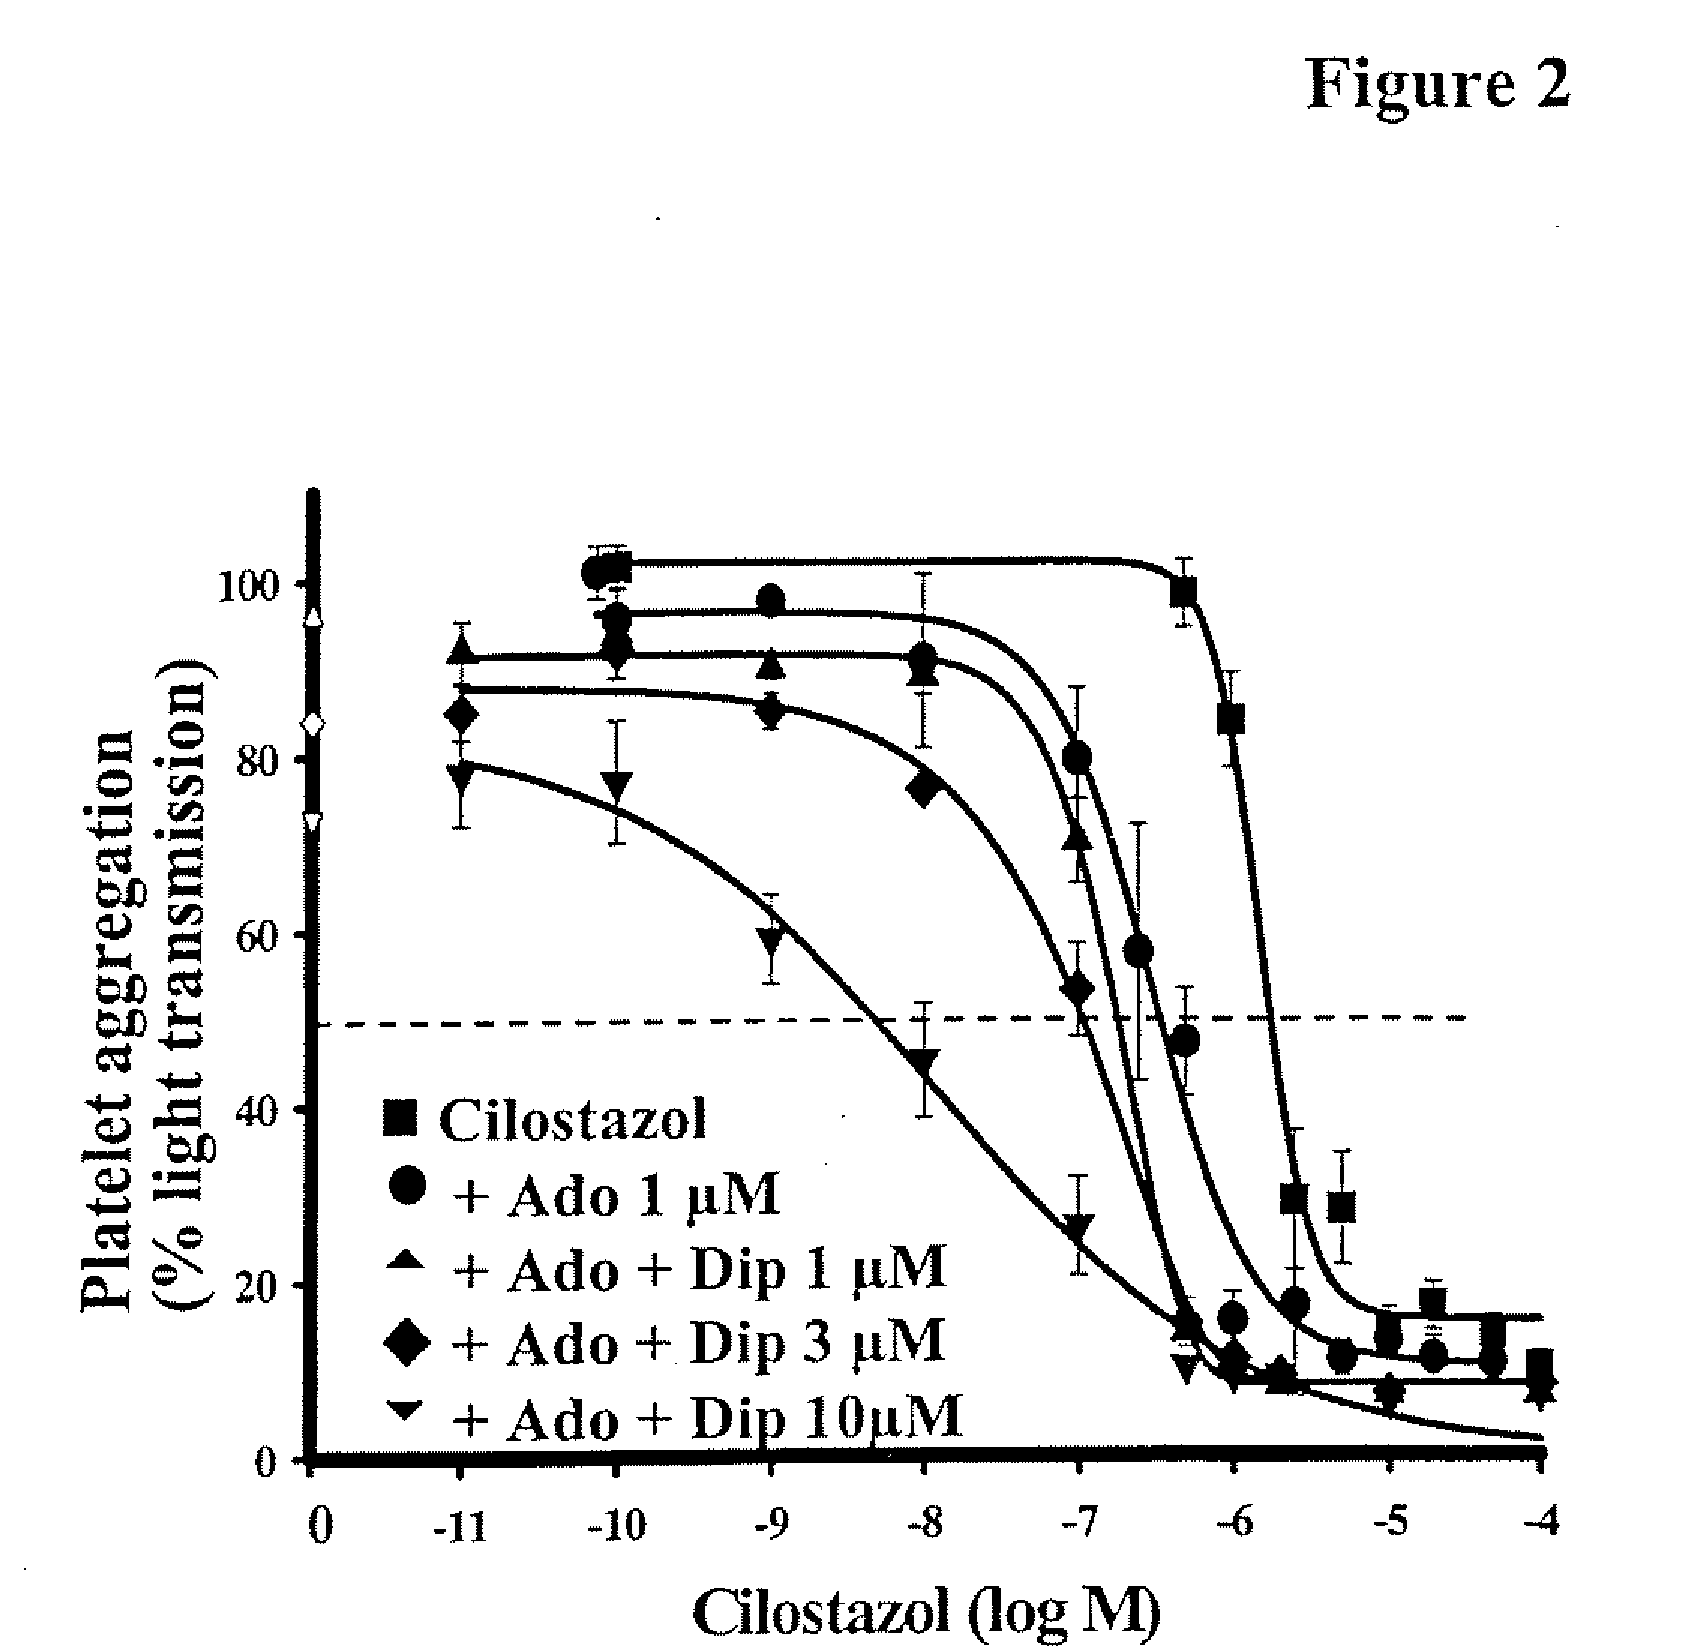 Pharmaceutical Compositions Comprising A Multifunctional Phosphodiesterase Inhibitor and An Adenosine Uptake Inhibitor